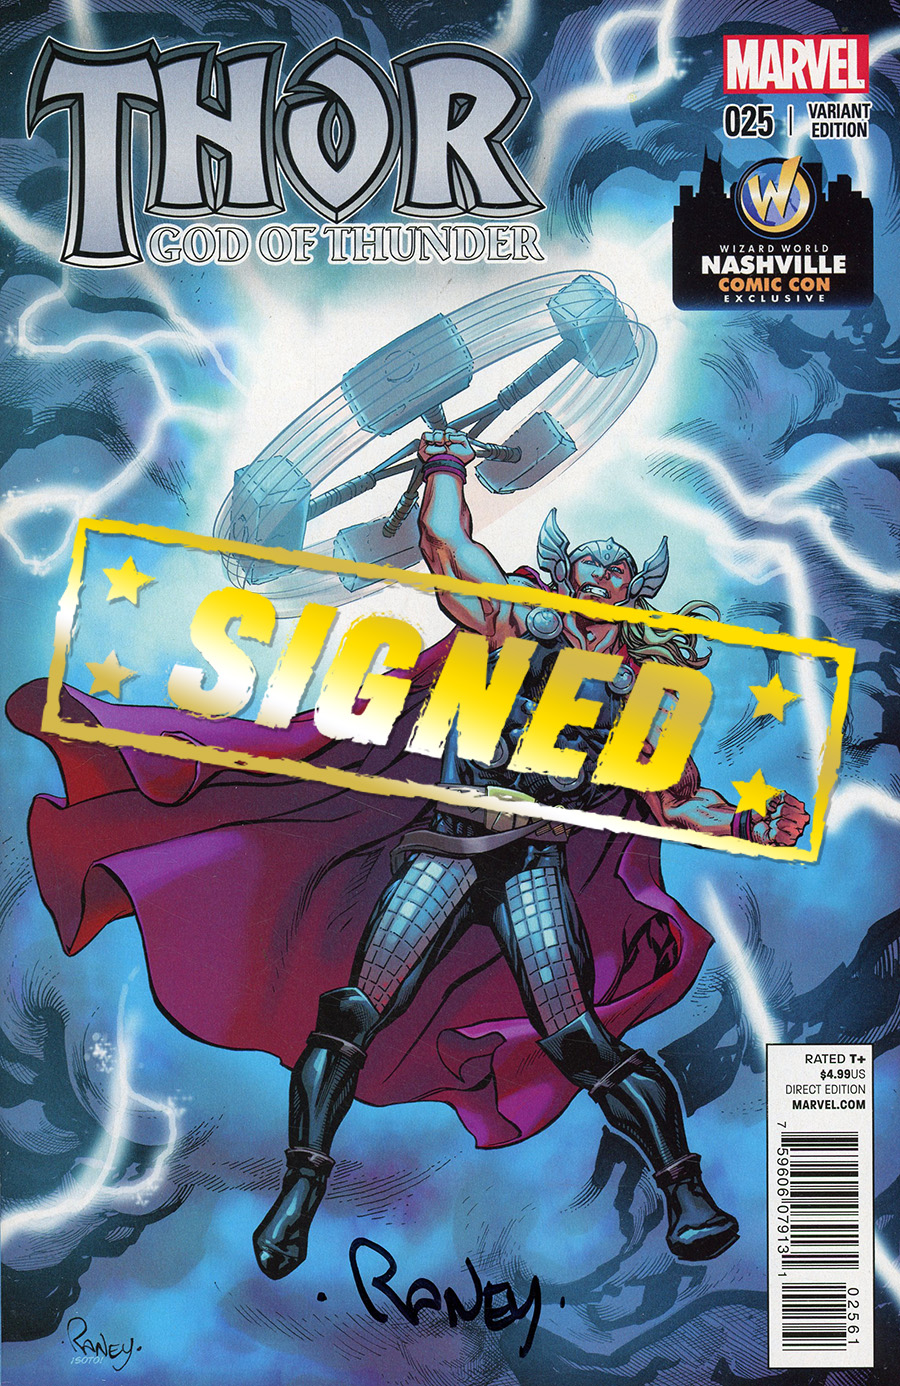 Thor God Of Thunder #25 Cover F Wizard World Nashville Comic Con Exclusive Tom Raney Variant Cover Signed By Tom Raney Without Certificate